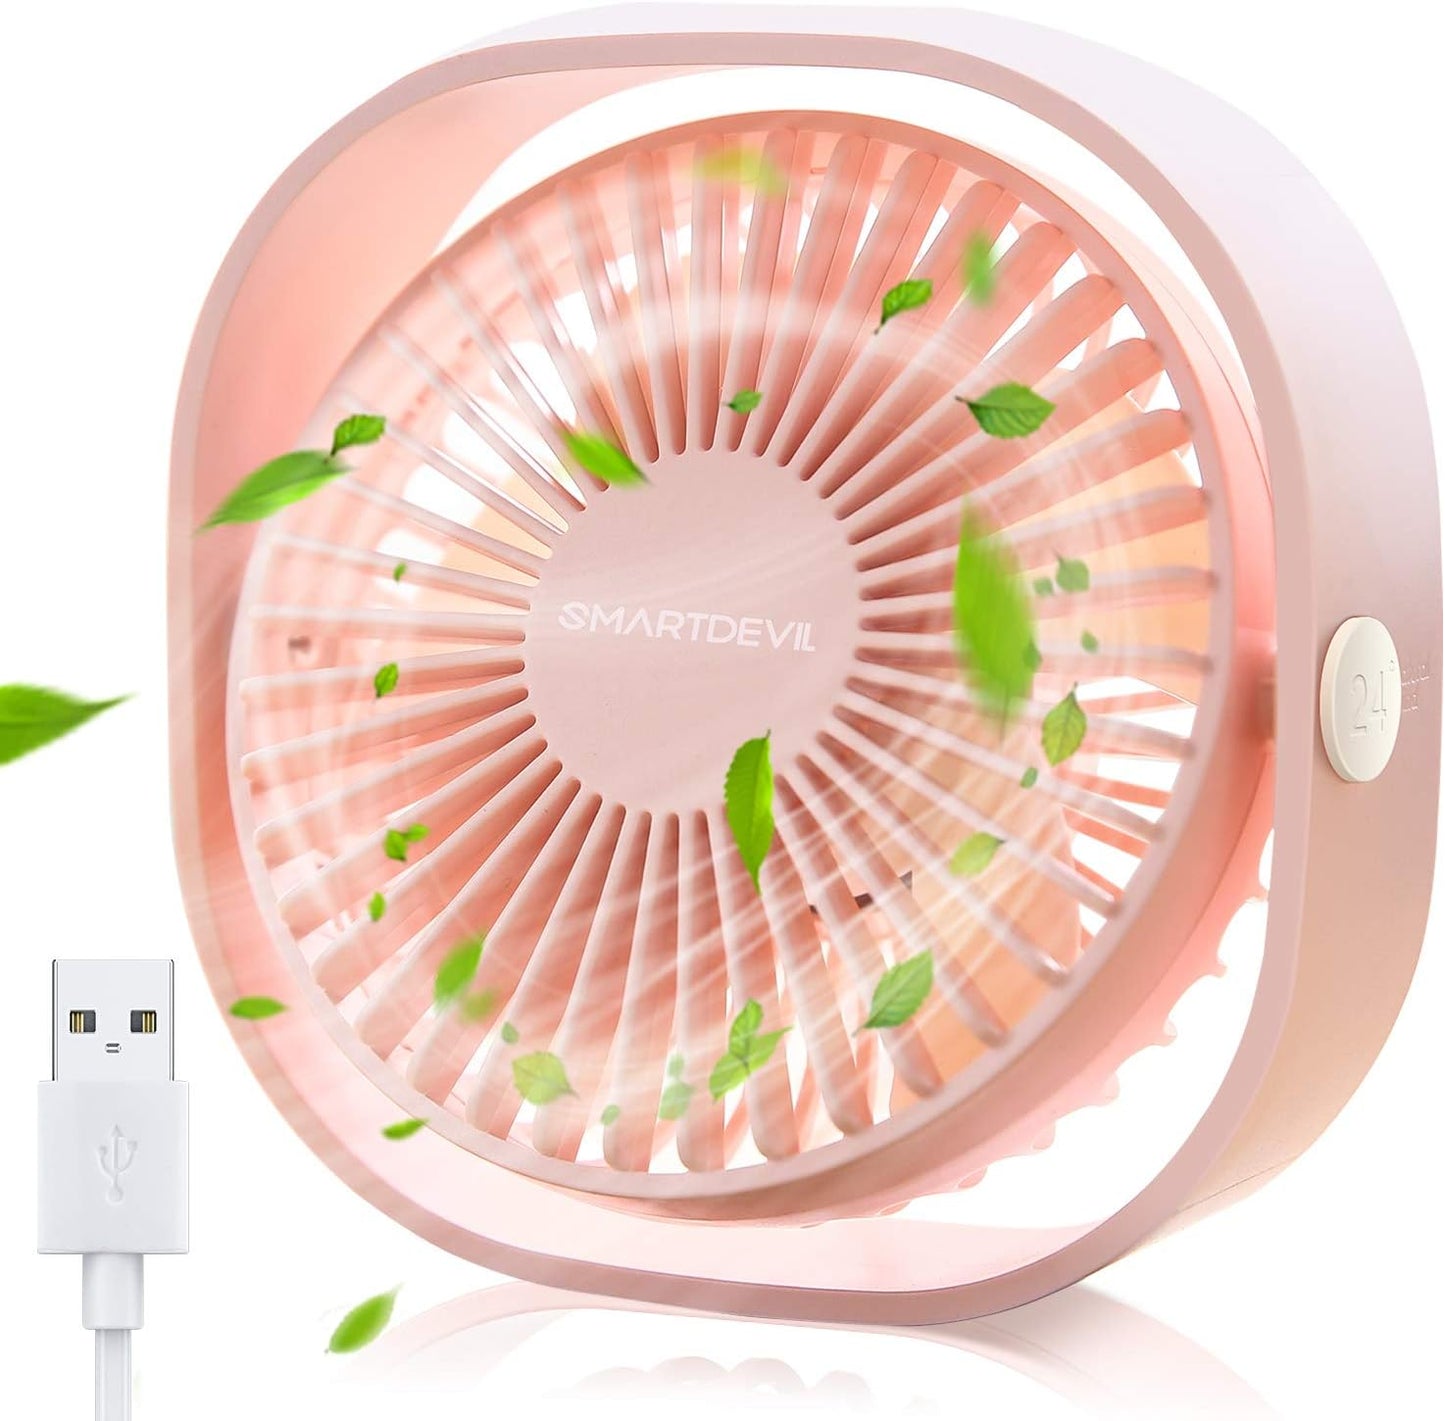 SmartDevil Small Personal USB Desk Fan,3 Speeds Portable Desktop Table Cooling Fan Powered by USB,Strong Wind,Quiet Operation,for Home Office Car Outdoor Travel (Cherry Pink)